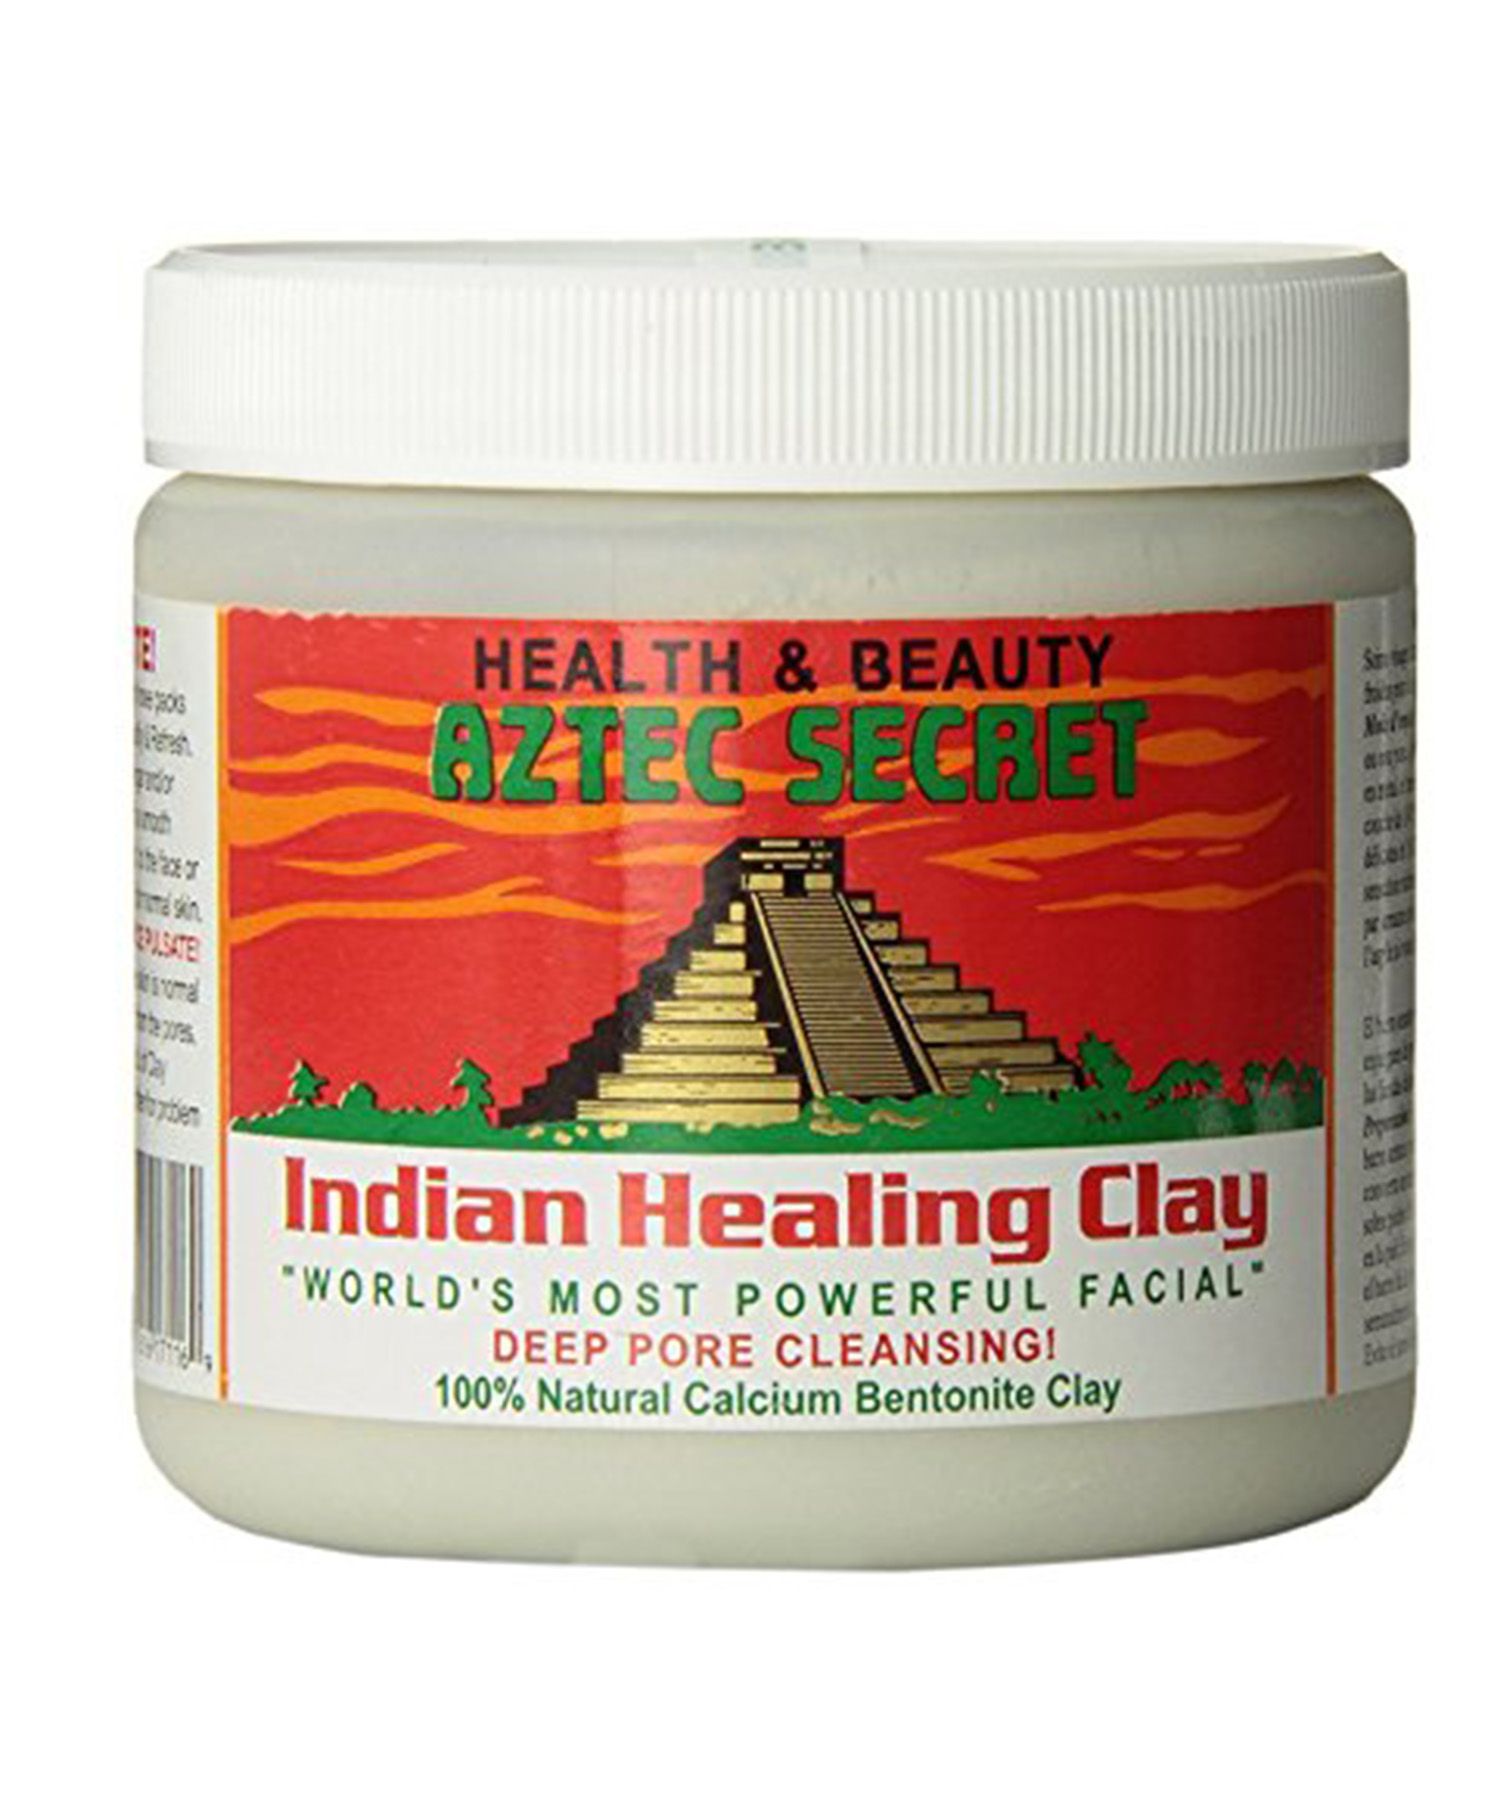 Aztec Secret Clay Face and Body Mask